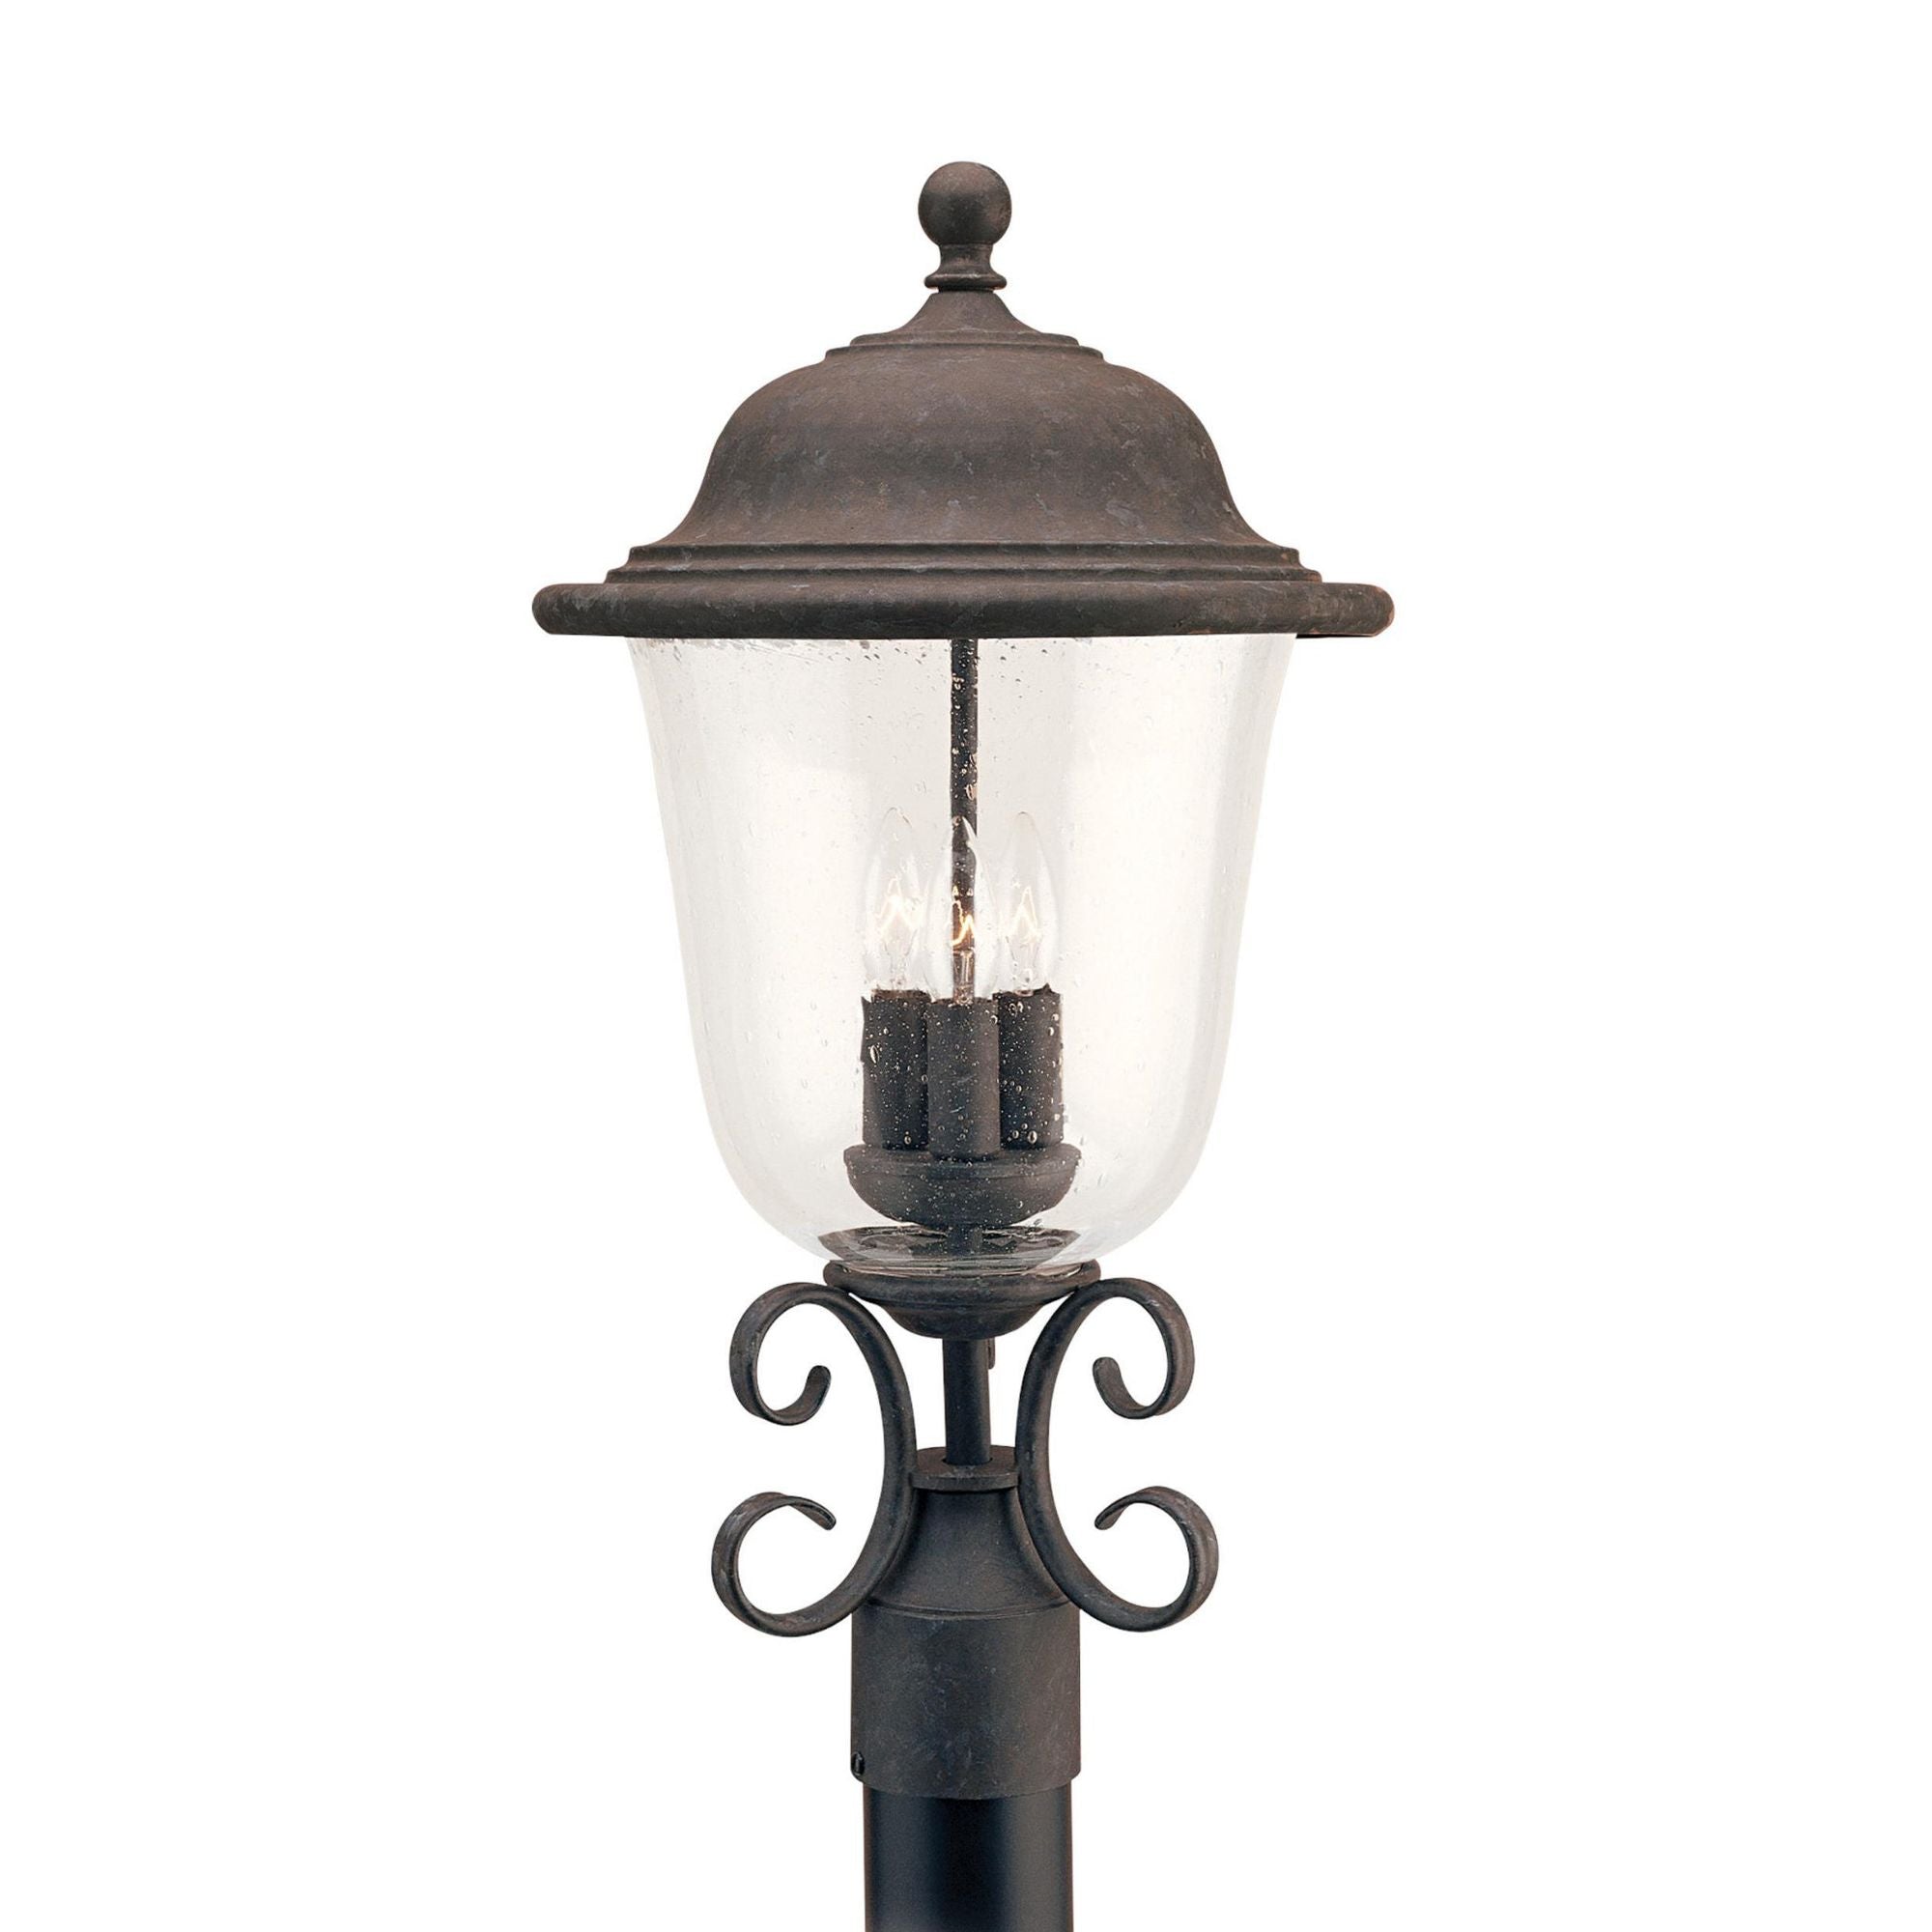 Trafalgar Three Light Outdoor Post Lantern LED Traditional Fixture 22.75" Height Aluminum Round Clear Seeded Shade in Oxidized Bronze